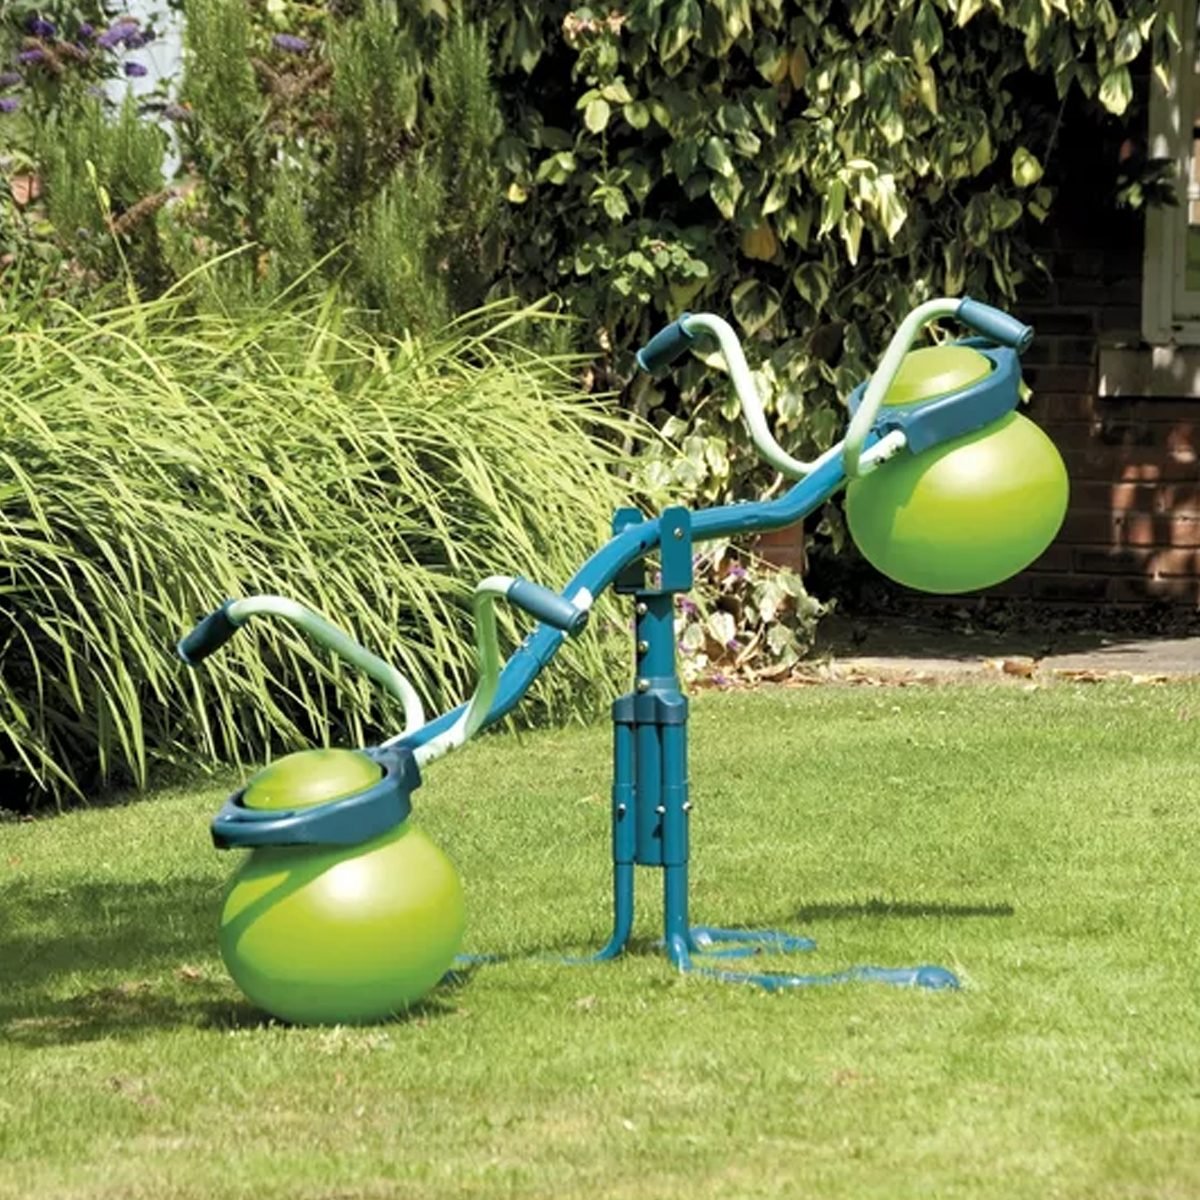 11 Awesome Outdoor Playsets for Kids of All Ages